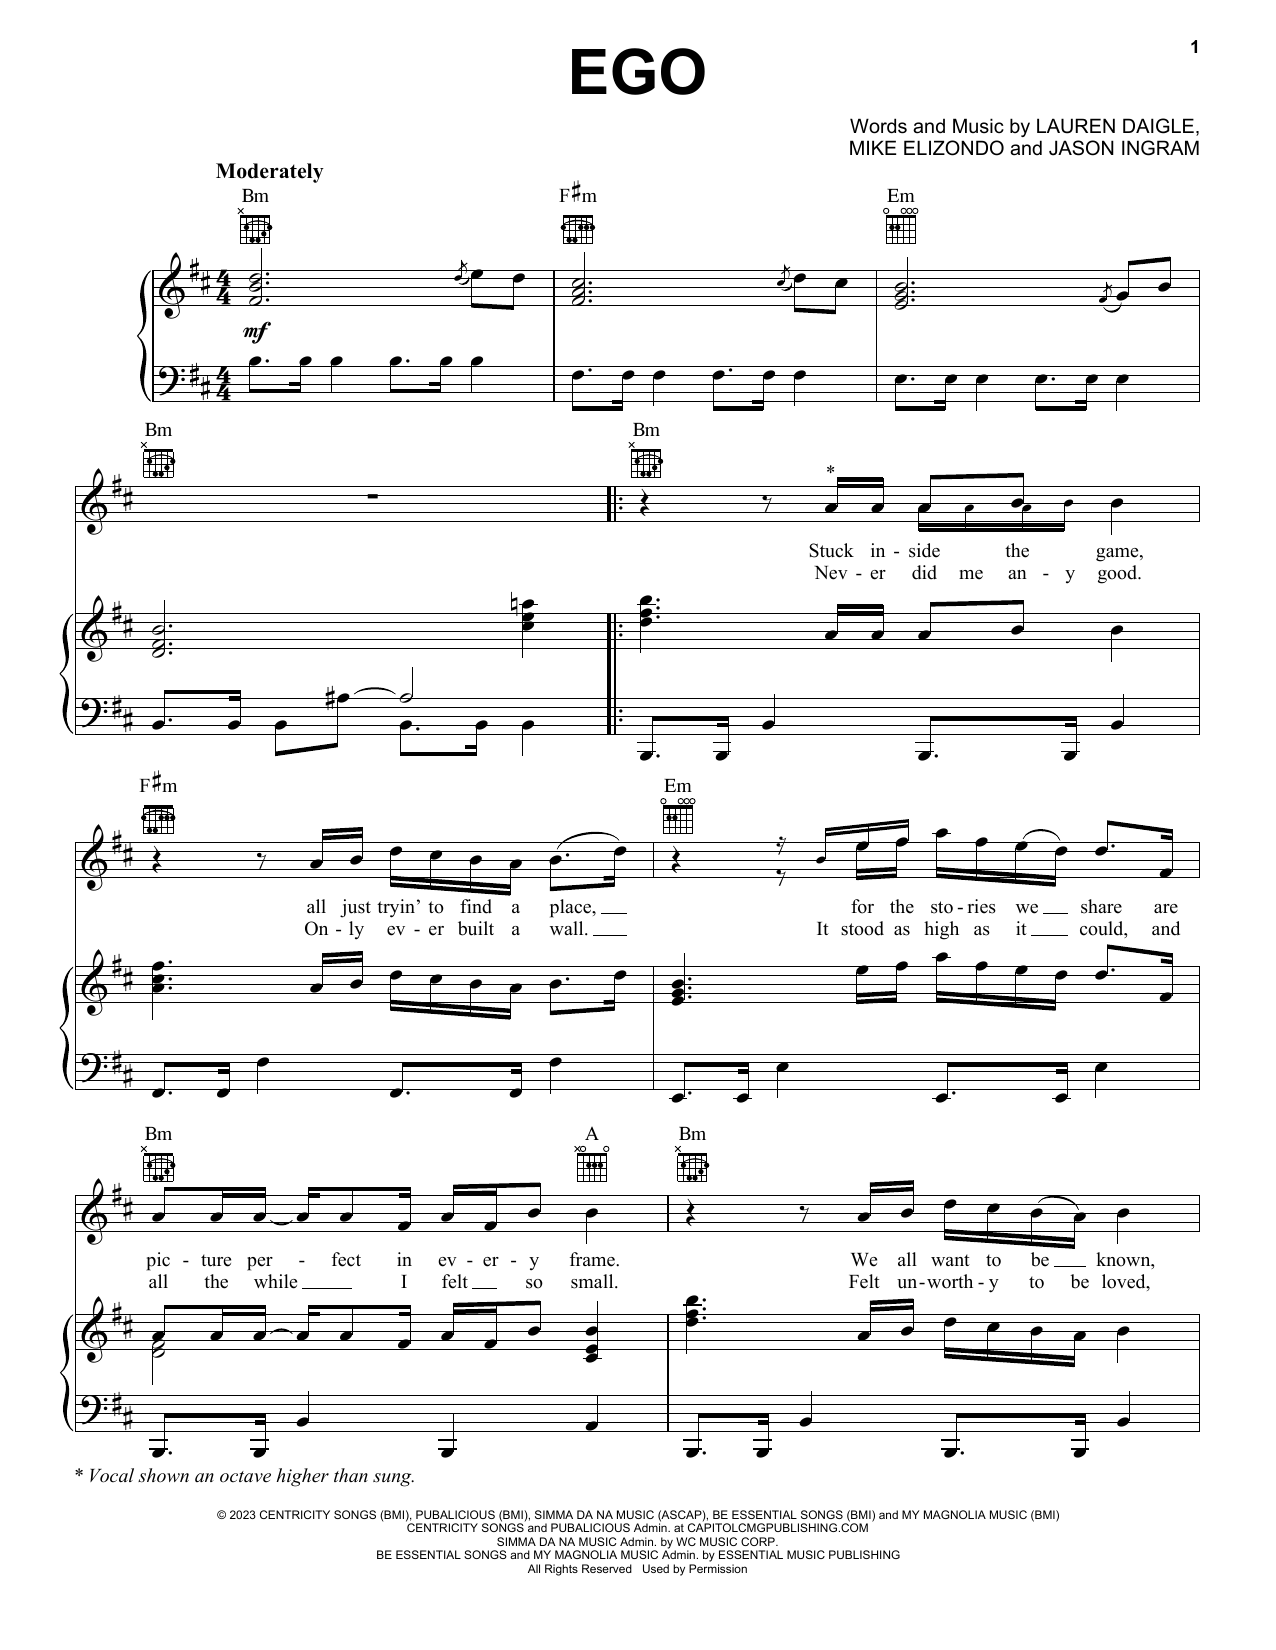 Lauren Daigle Ego sheet music notes and chords. Download Printable PDF.